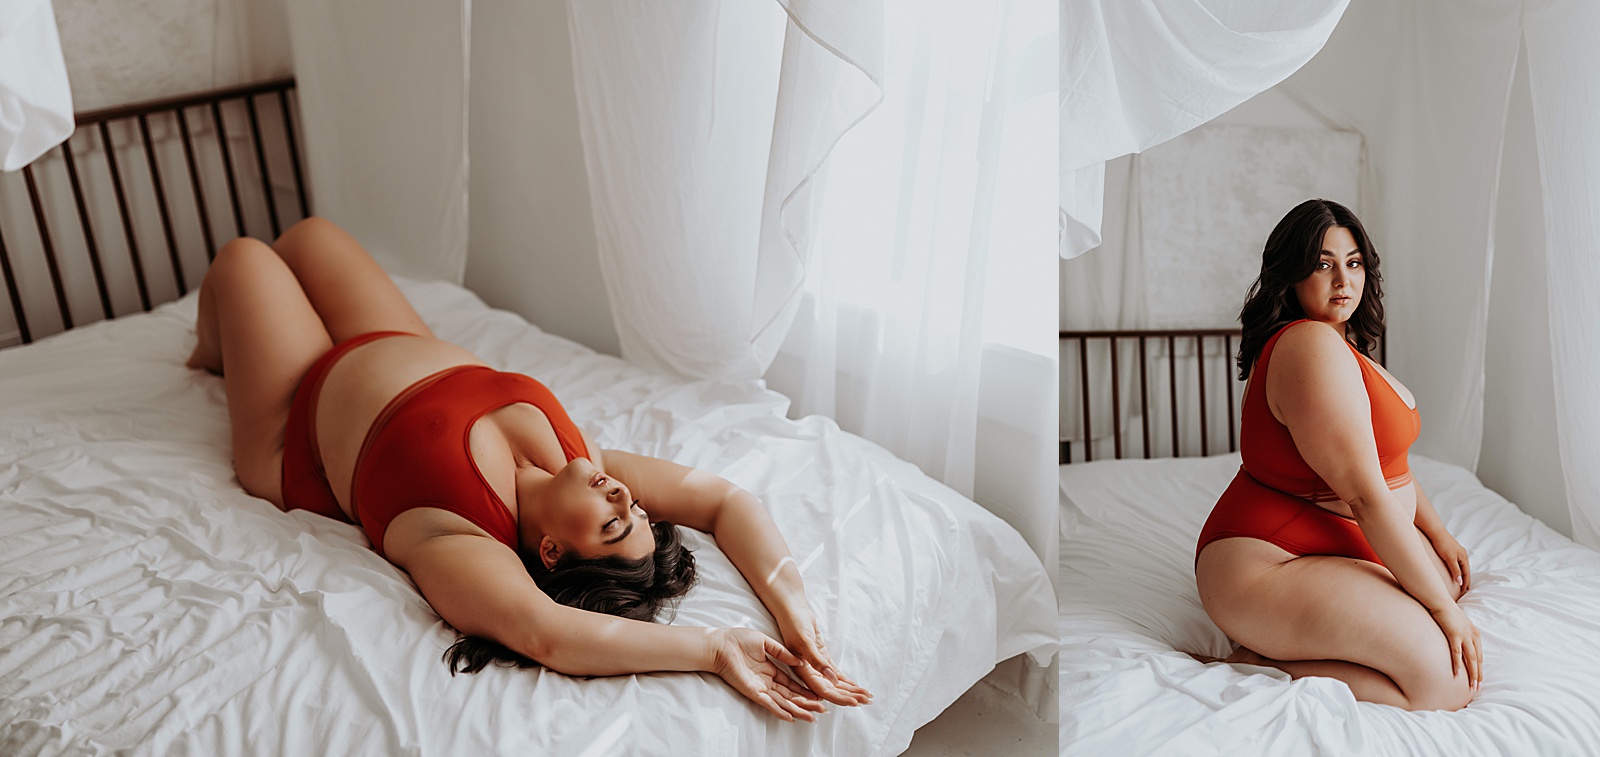 Woman in orange lingerie on bed for body activist shoot